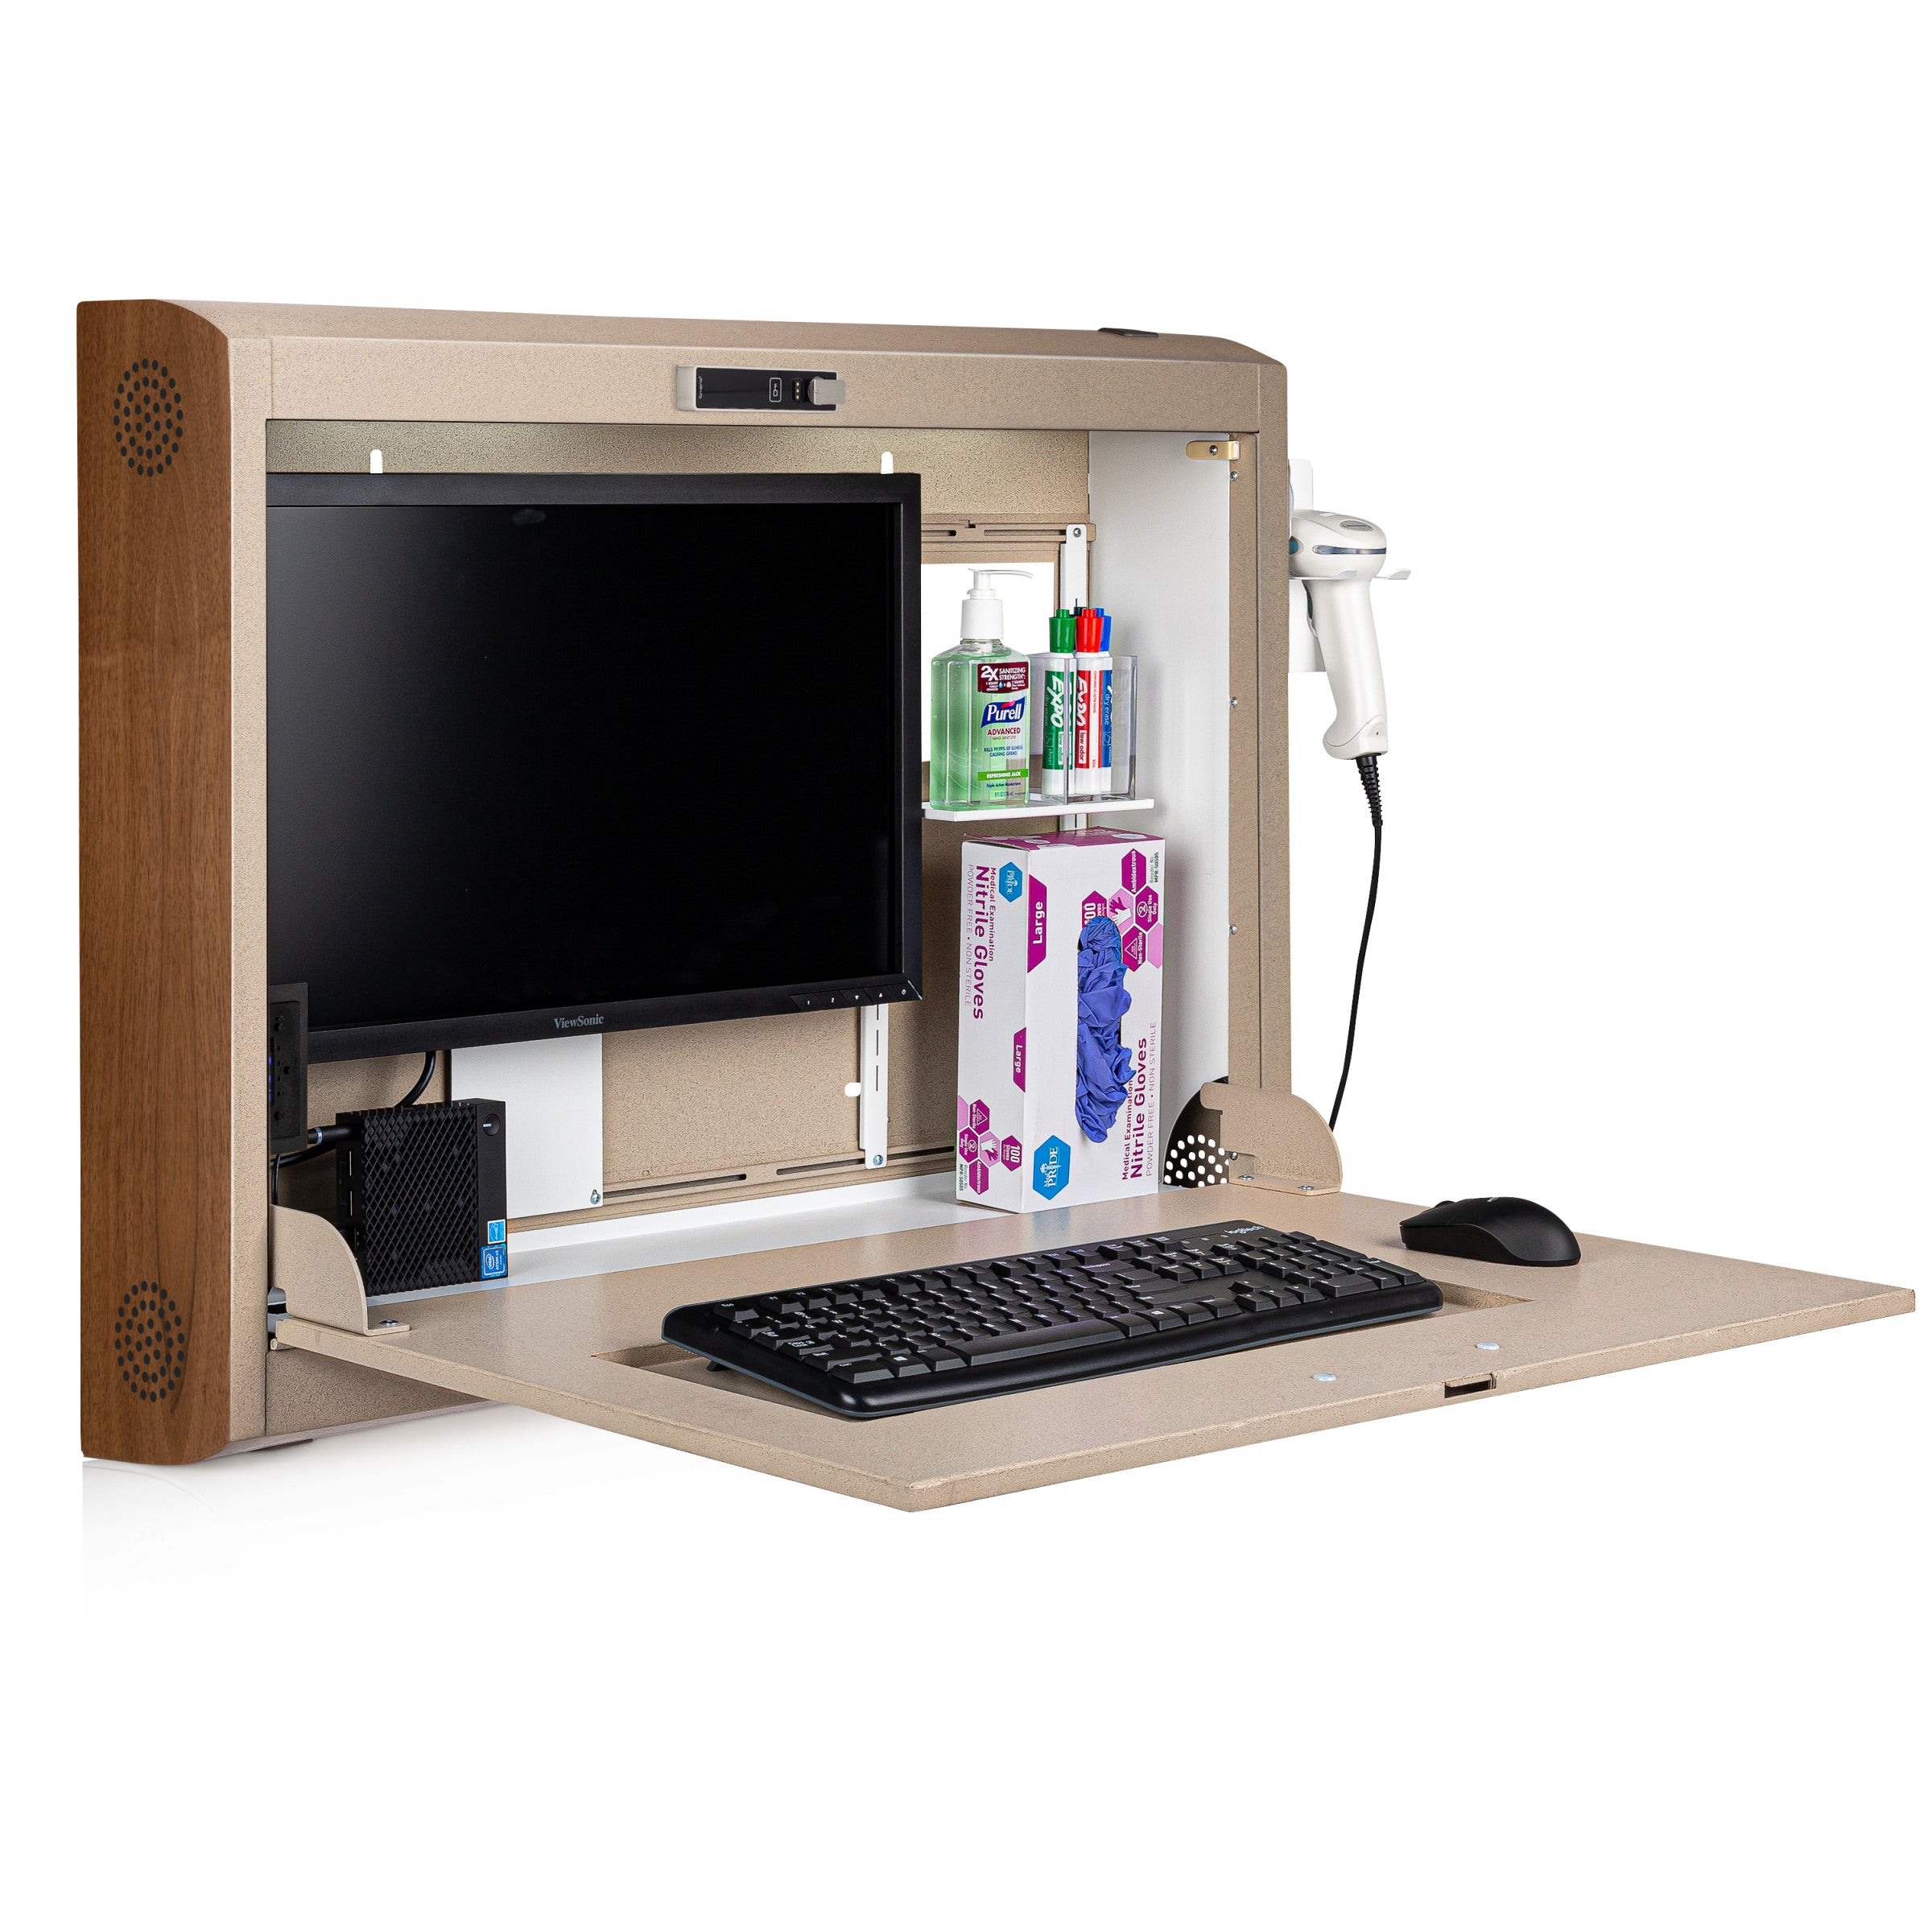 CarePod® Wide 6” Wall-Mounted Workstations with Keyboard Door, Sandstone